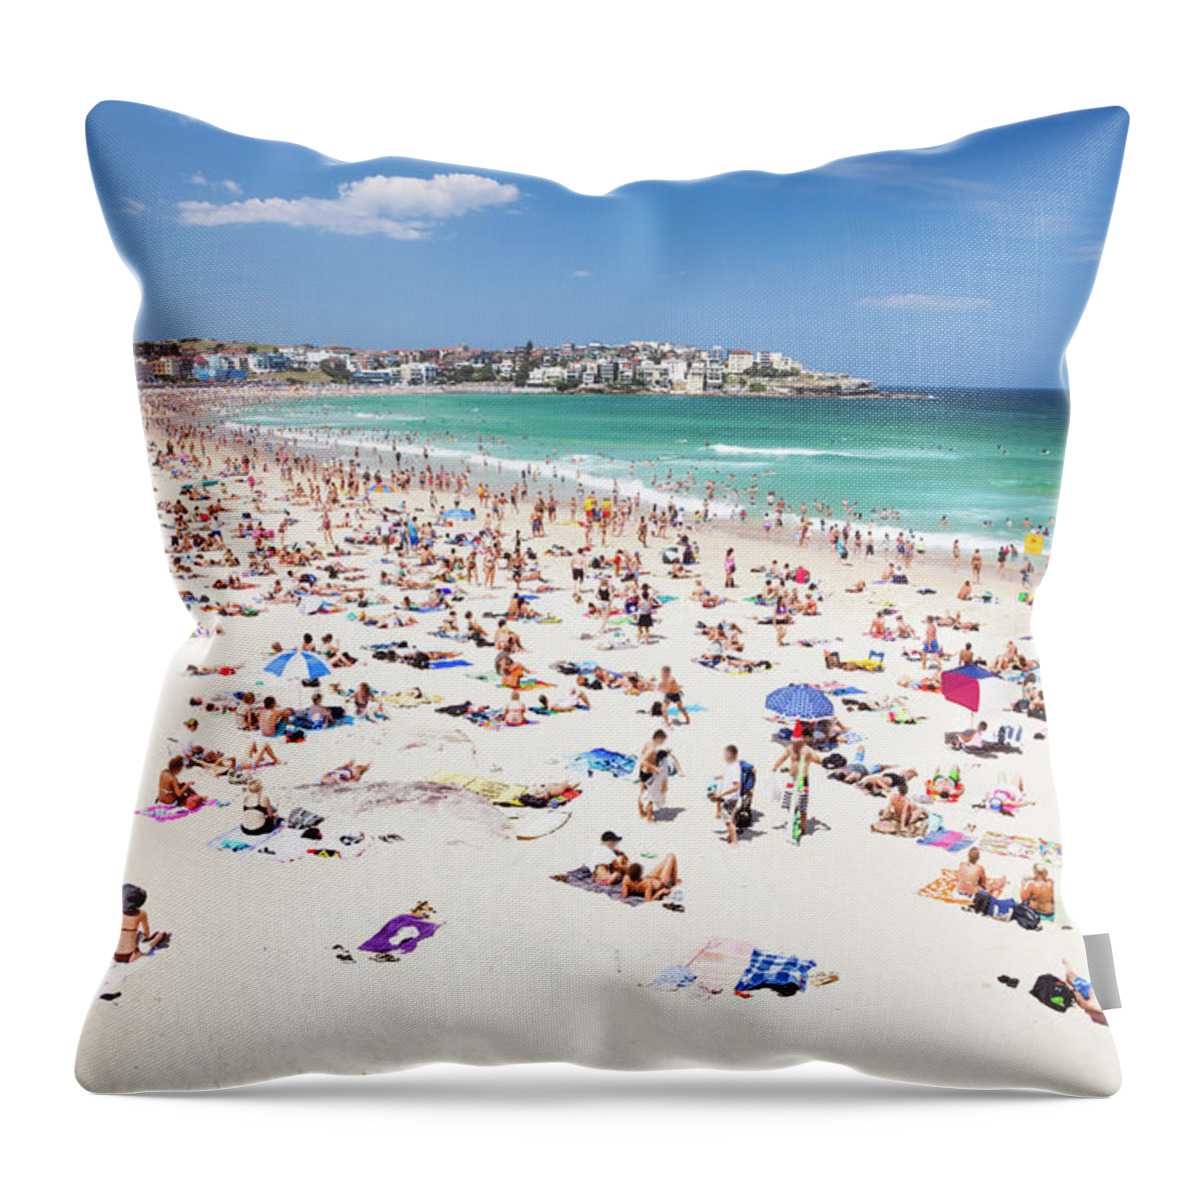 Water's Edge Throw Pillow featuring the photograph Crowded Bondi Beach, Sydney, Australia by Matteo Colombo